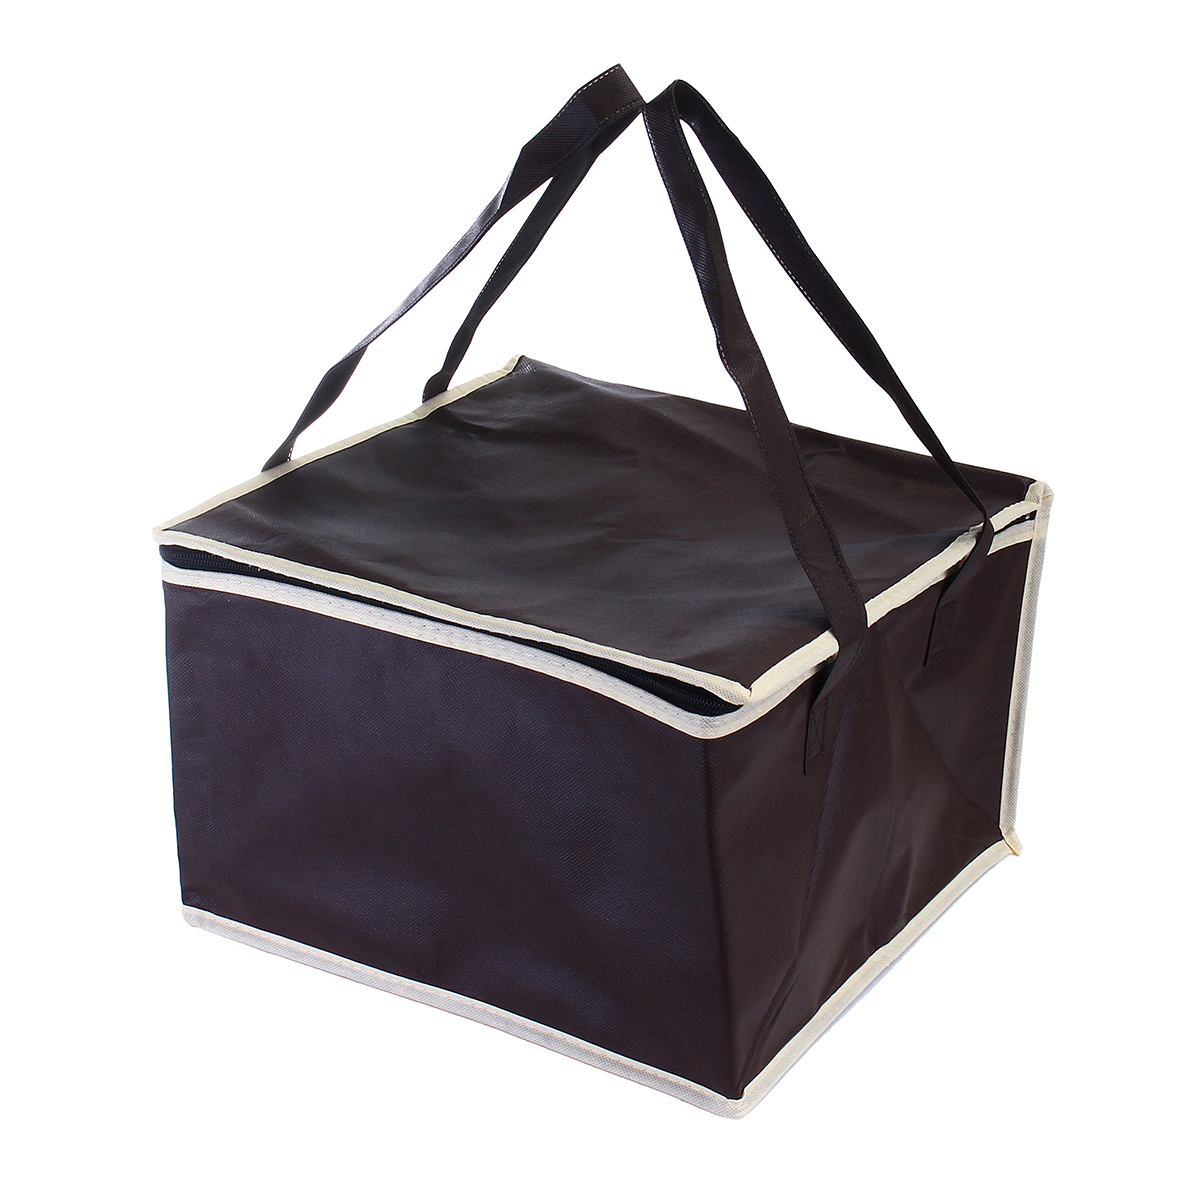 8-Inch-Non-woven-Fresh-keeping-Tote-Bag-with-Zipper-Cake-Picnic-Lunch-Bag-Reusable-Grocery-Bag-1353005-8